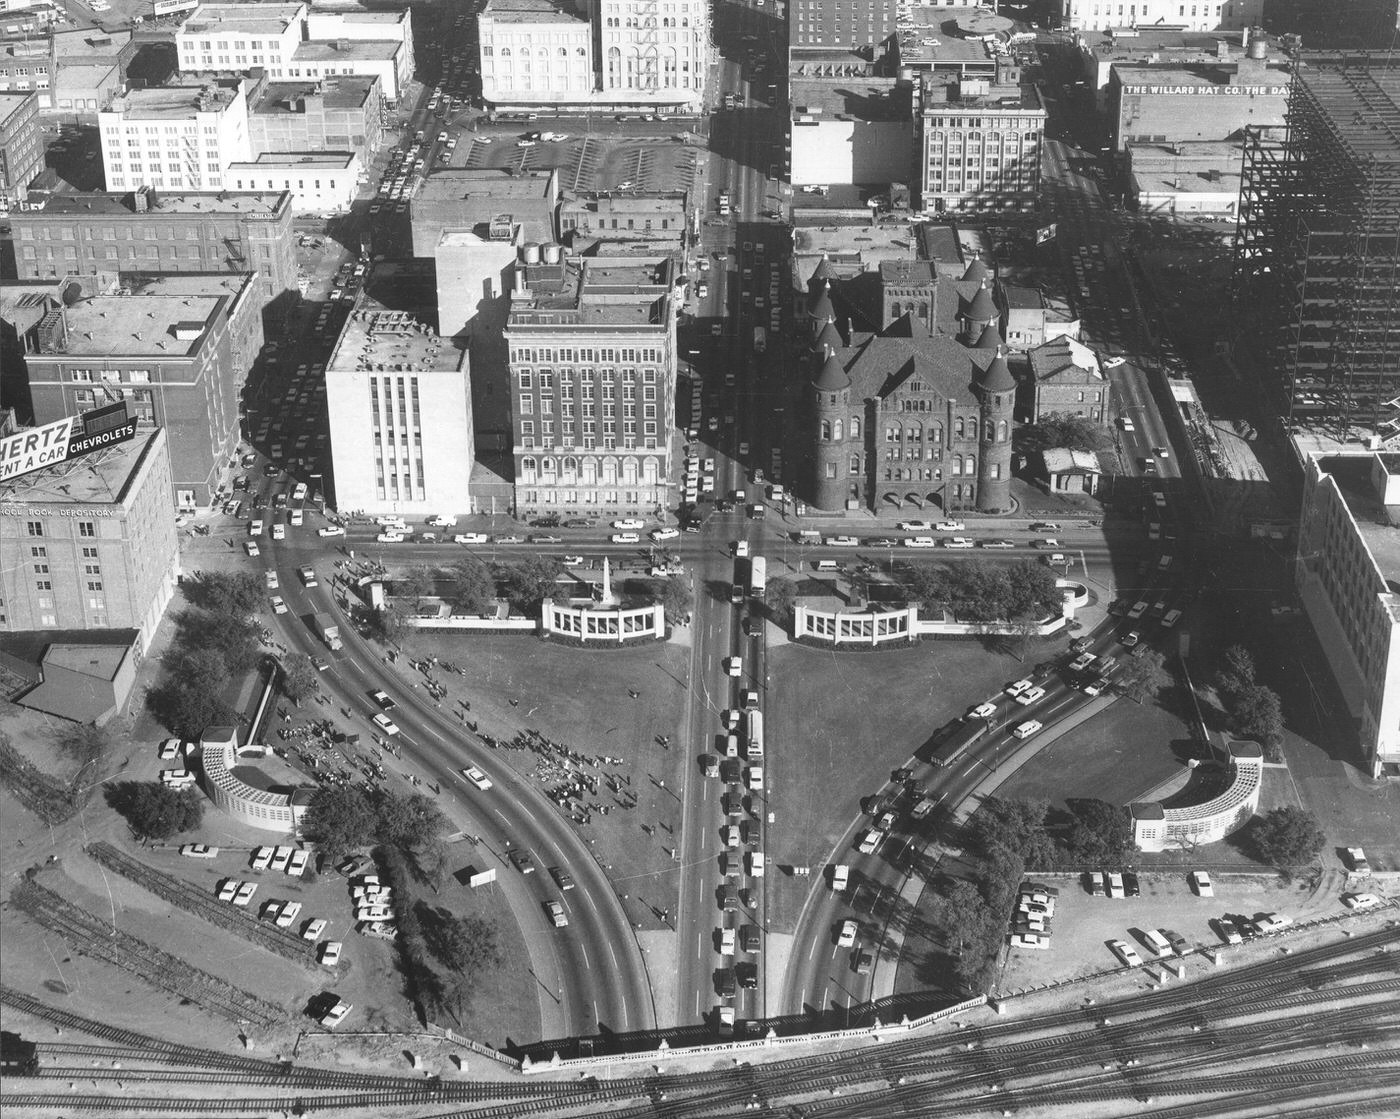 Dealey Plaza and triple underpass, Dallas, Texas, 1963